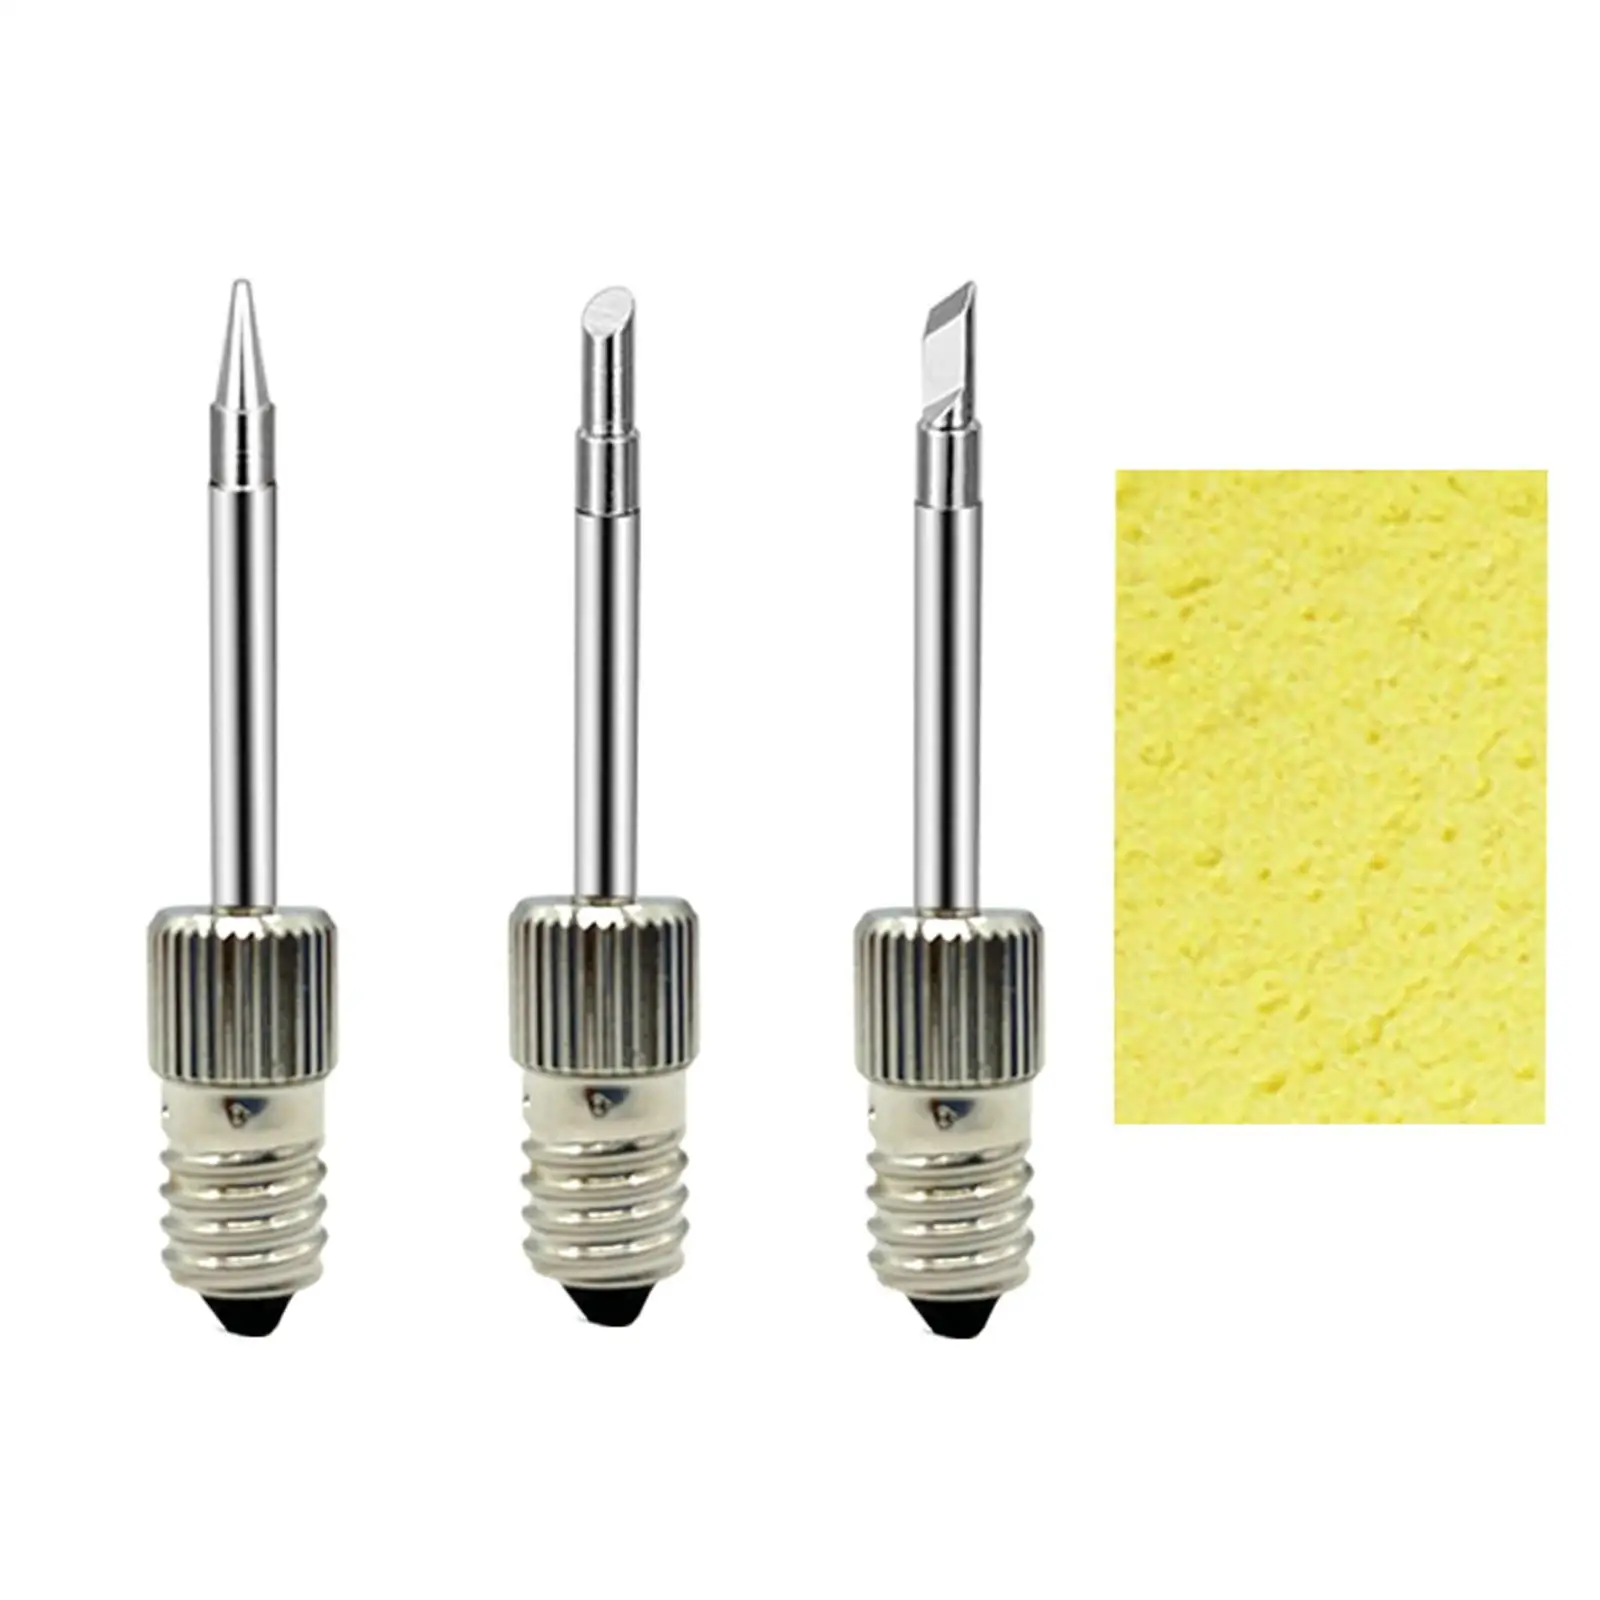 3x Soldering Tips Replacement USB Soldering for E10 Interface